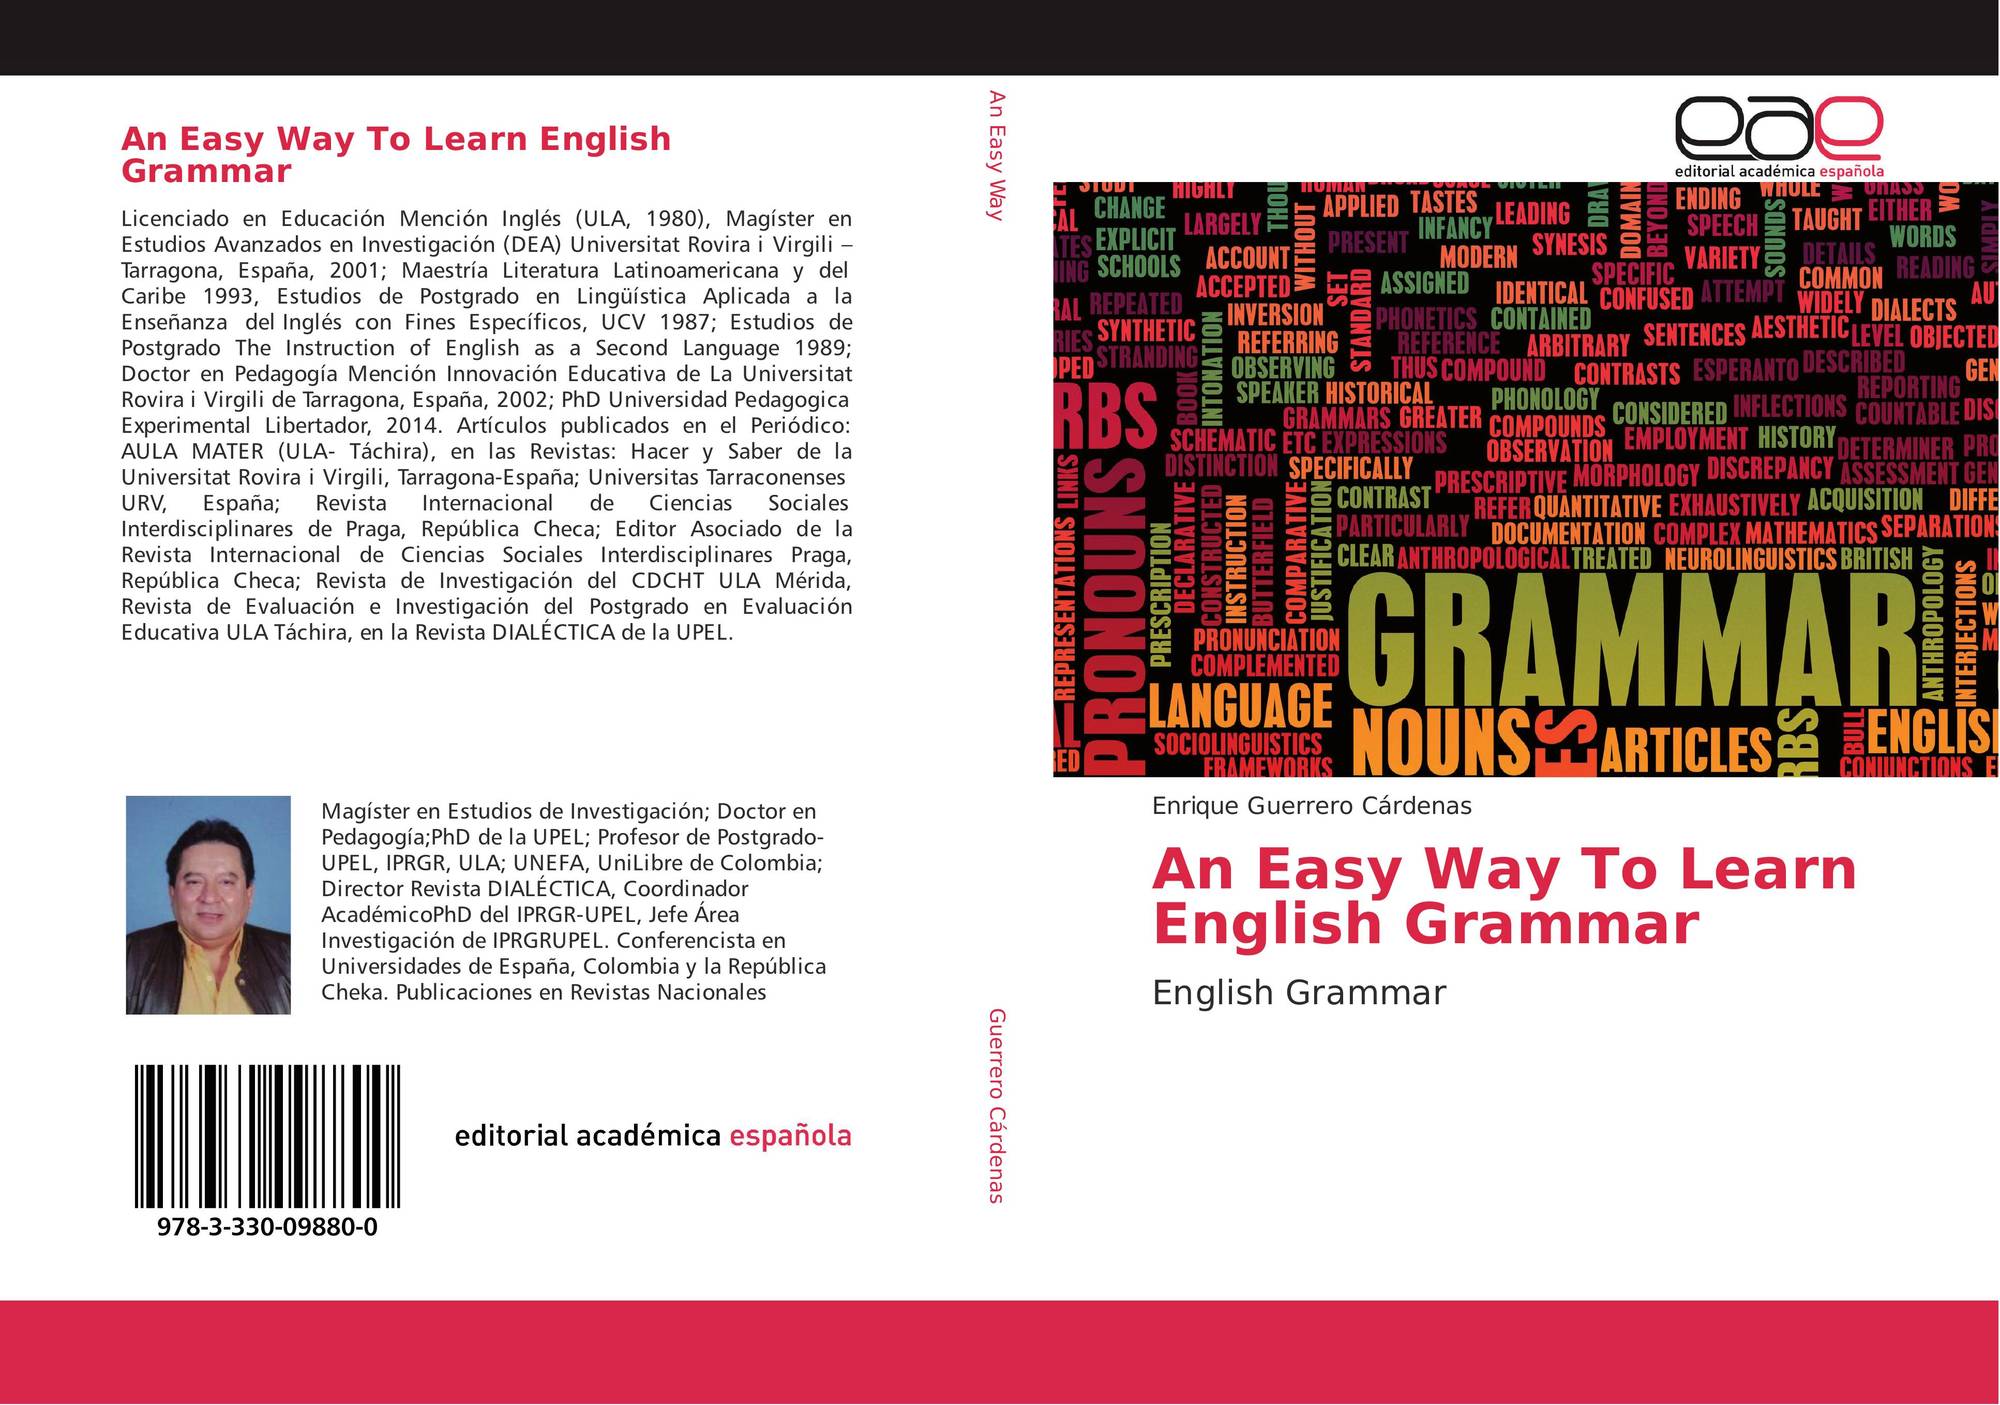 an-easy-way-to-learn-english-grammar-978-3-330-09880-0-3330098805